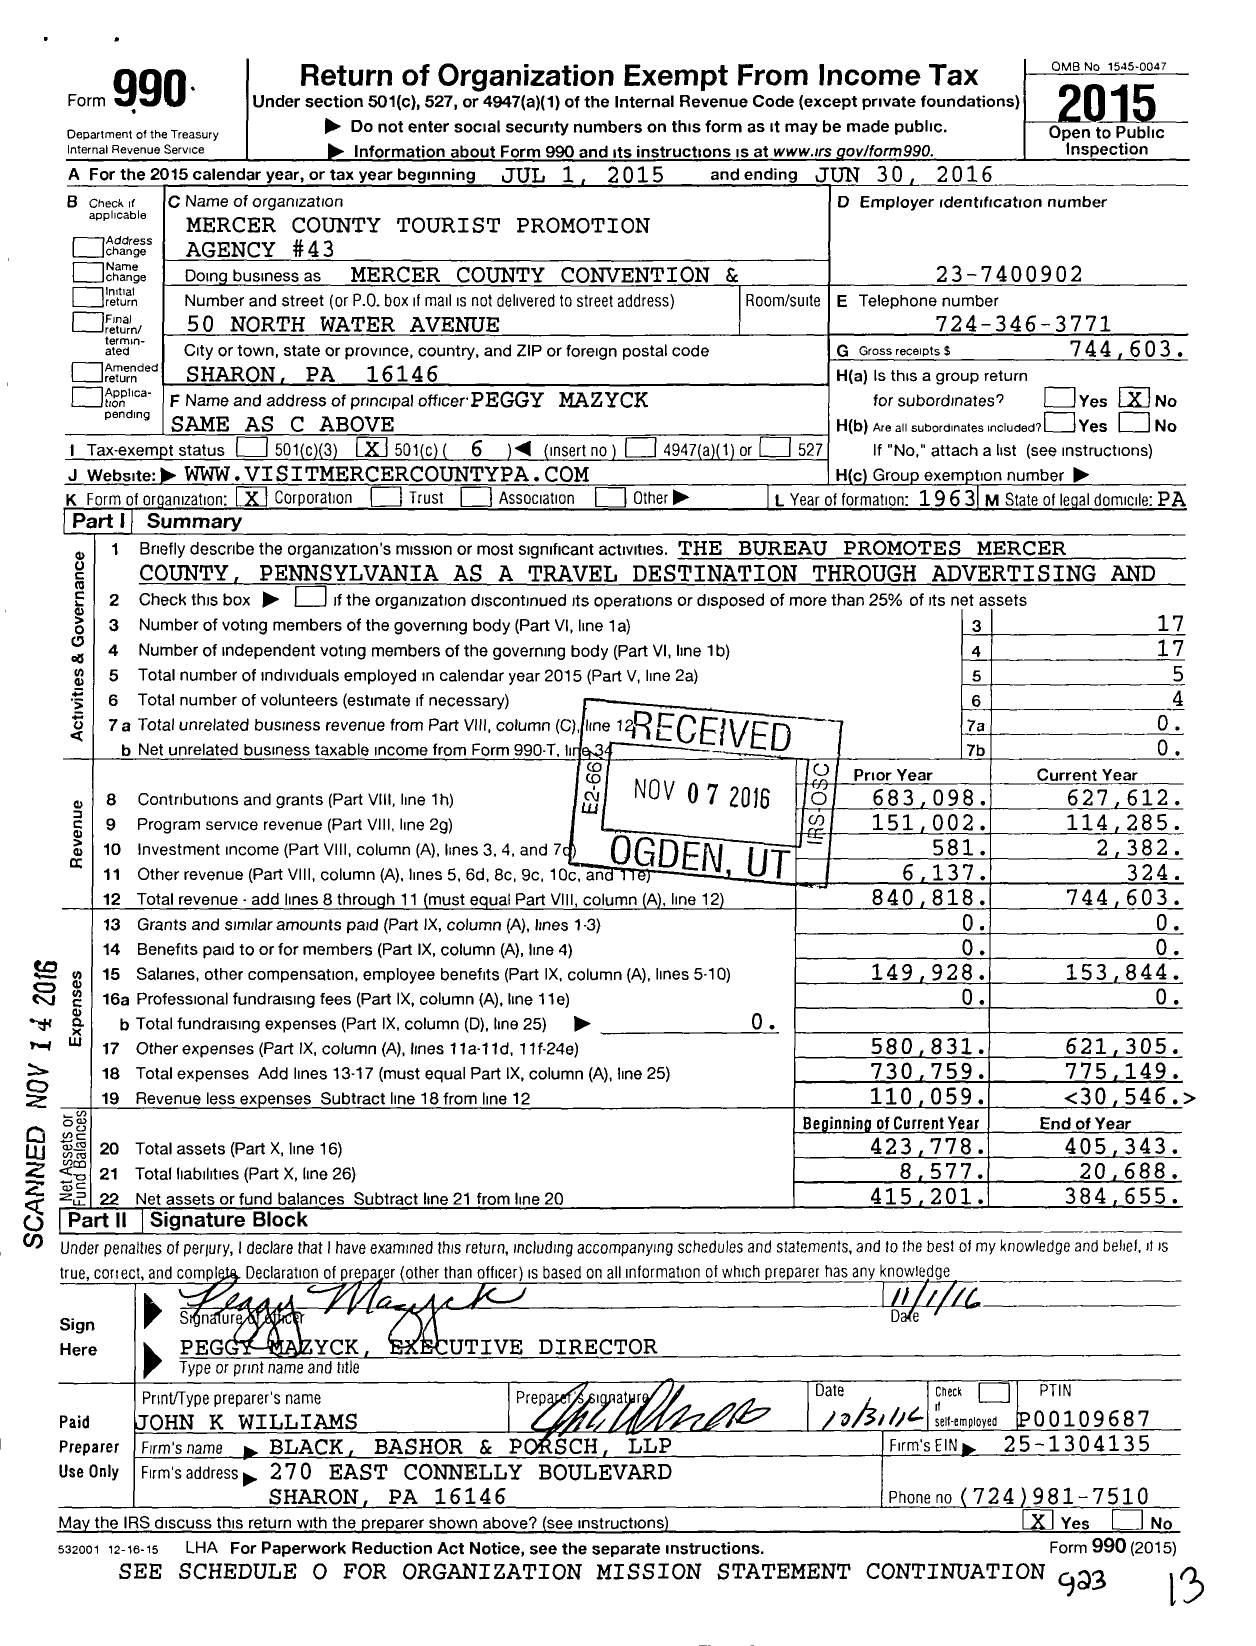 Image of first page of 2015 Form 990O for Mercer County Convention and Visitors Bureau / Mercer County Tourist Promotion Agency #43